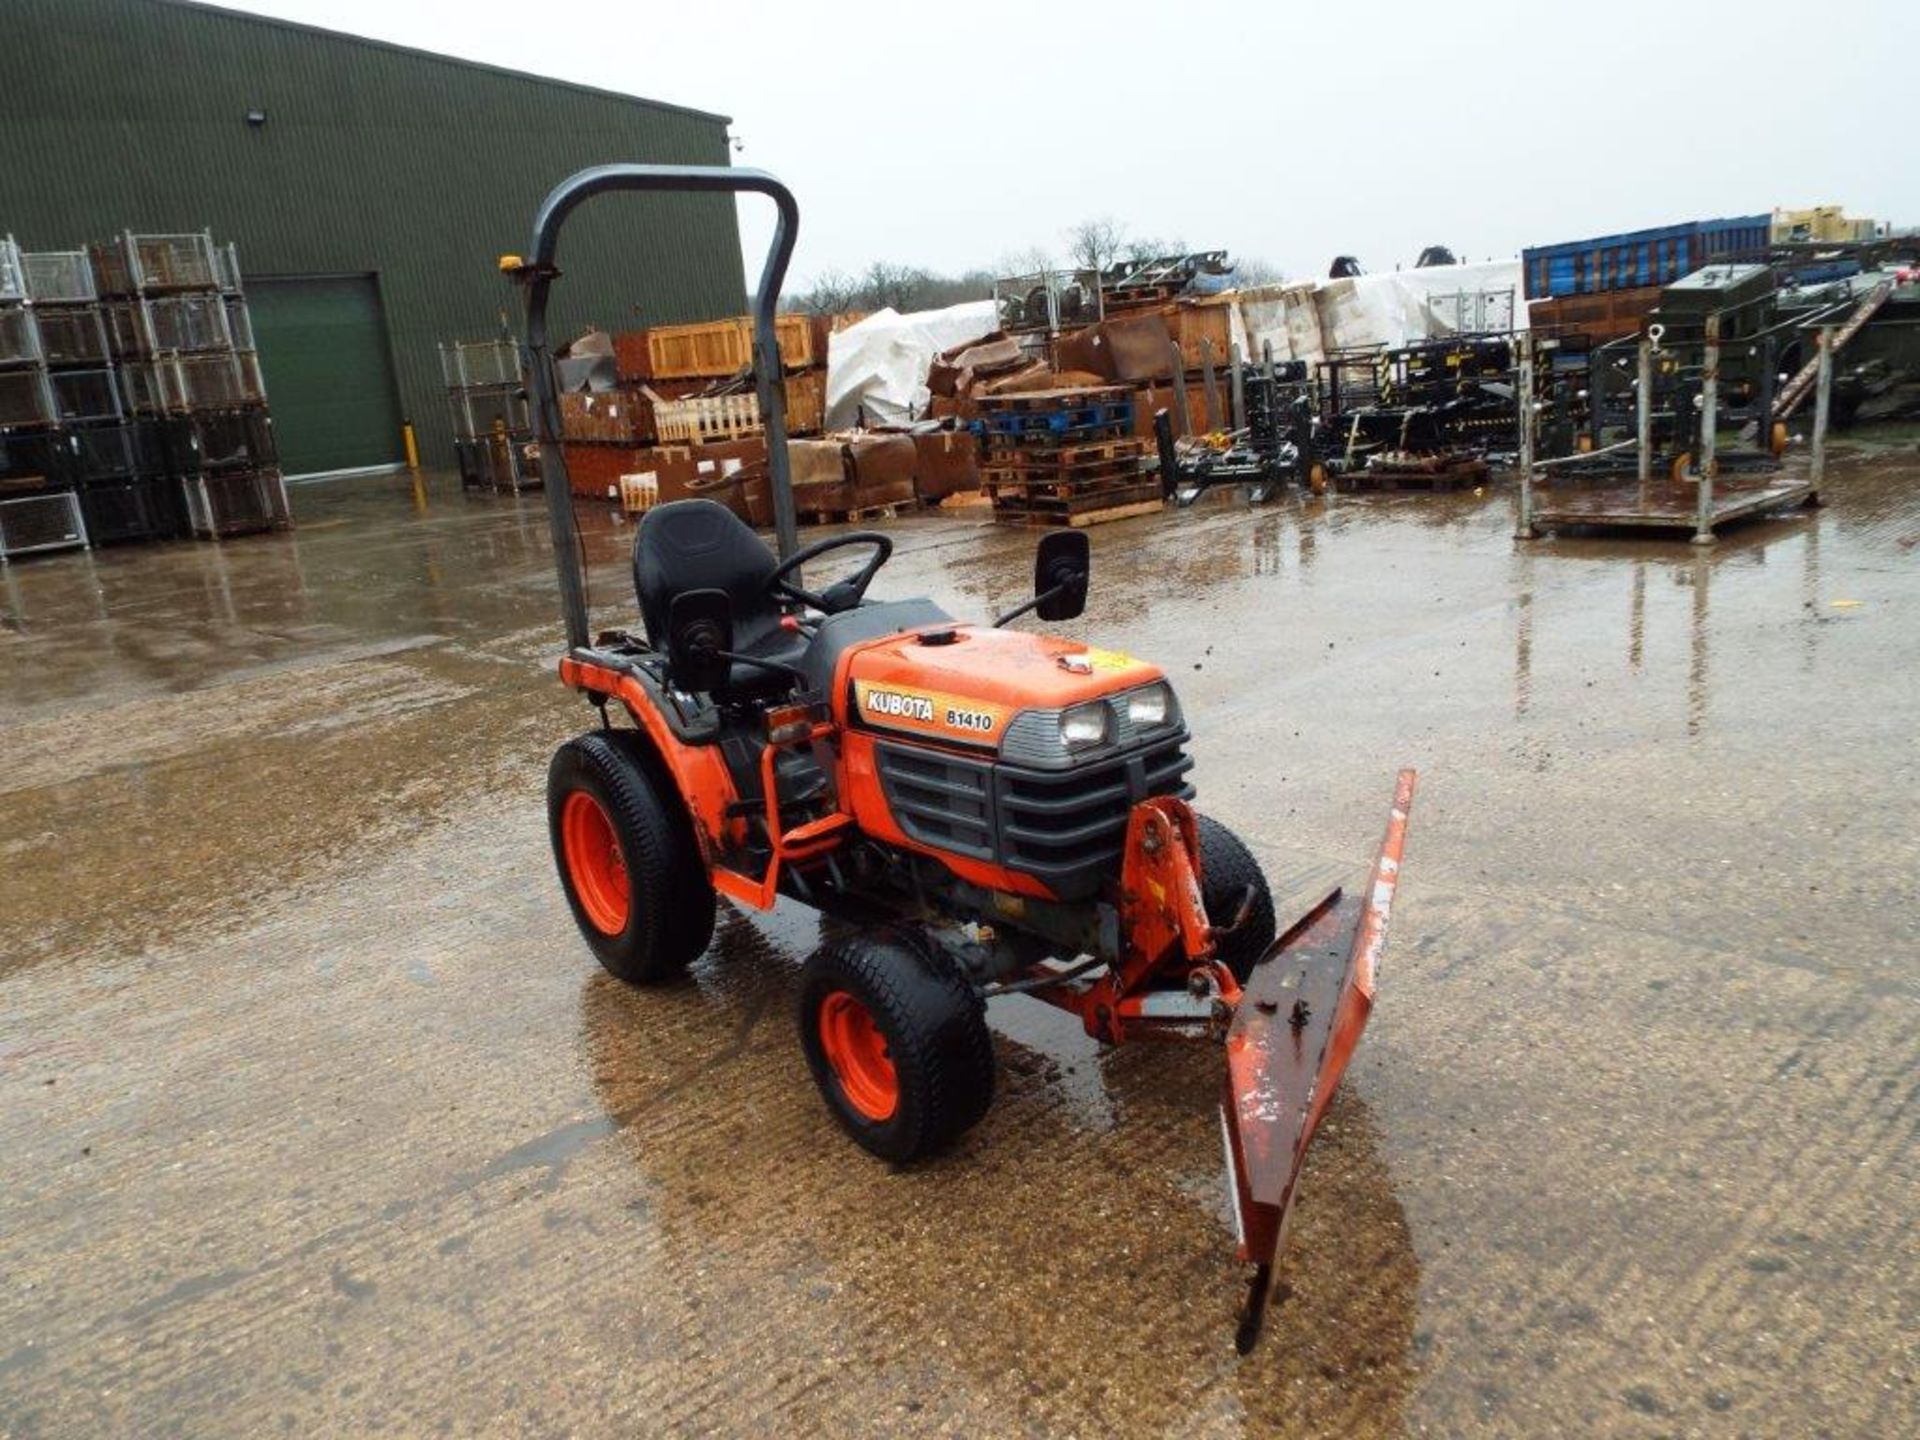 Kubota B1410D 4WD Diesel Powered Compact Tractor with Hydraulic Snow Plough Attachment